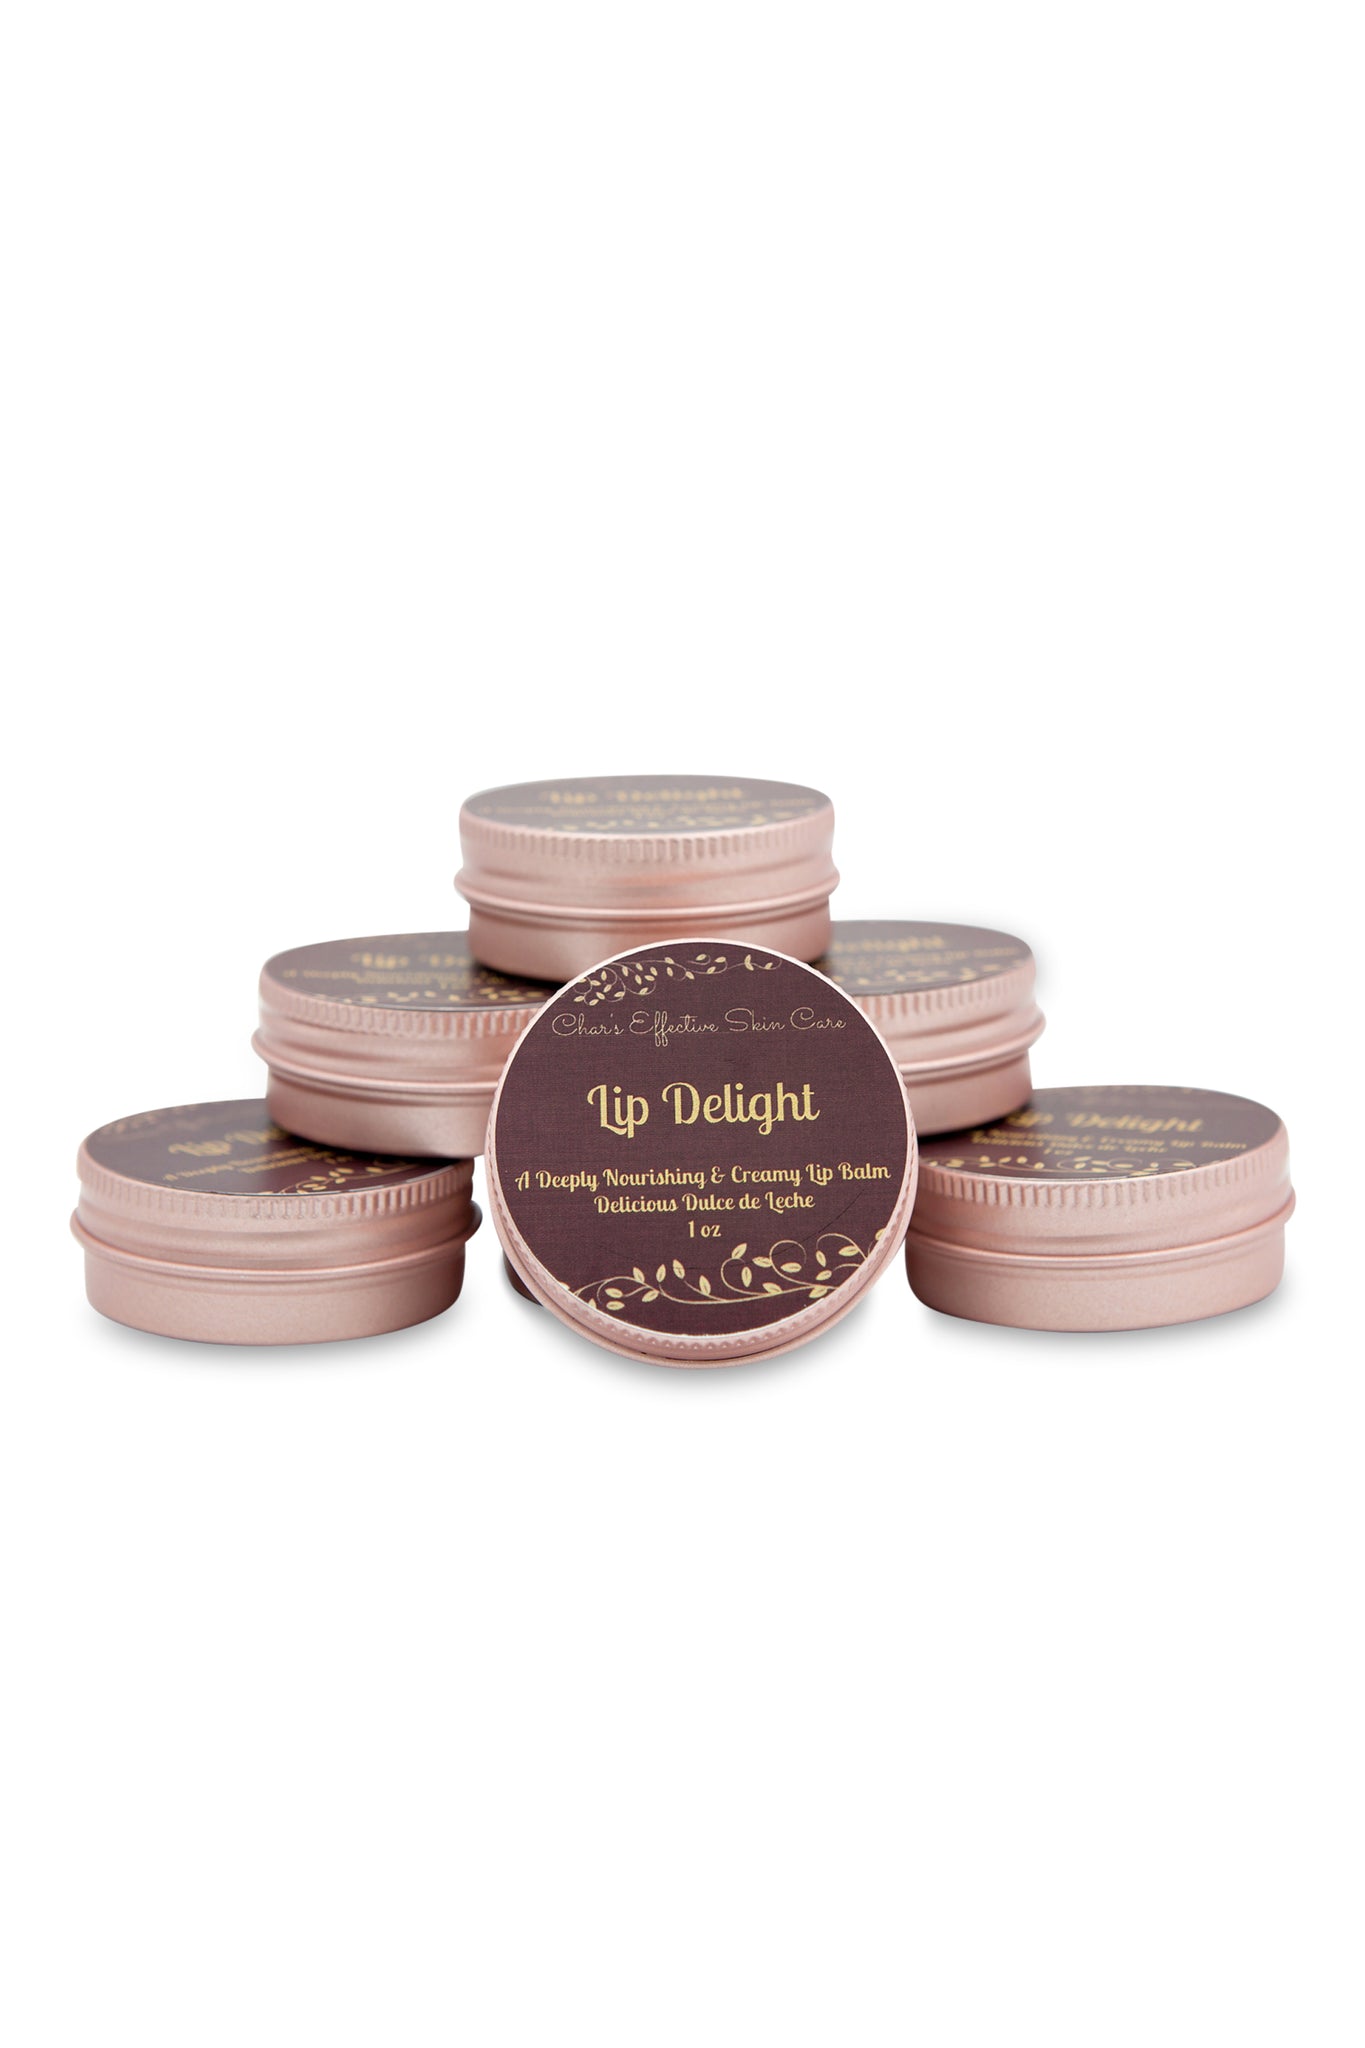 Several Stacked  Lip Delight/Several 1 oz rose gold round containers/ Deeply Nourishing and Creamy Lip Balm/Dulce de Leche Caramel Flavor or Unflavored/ Char's Effective Skin Care